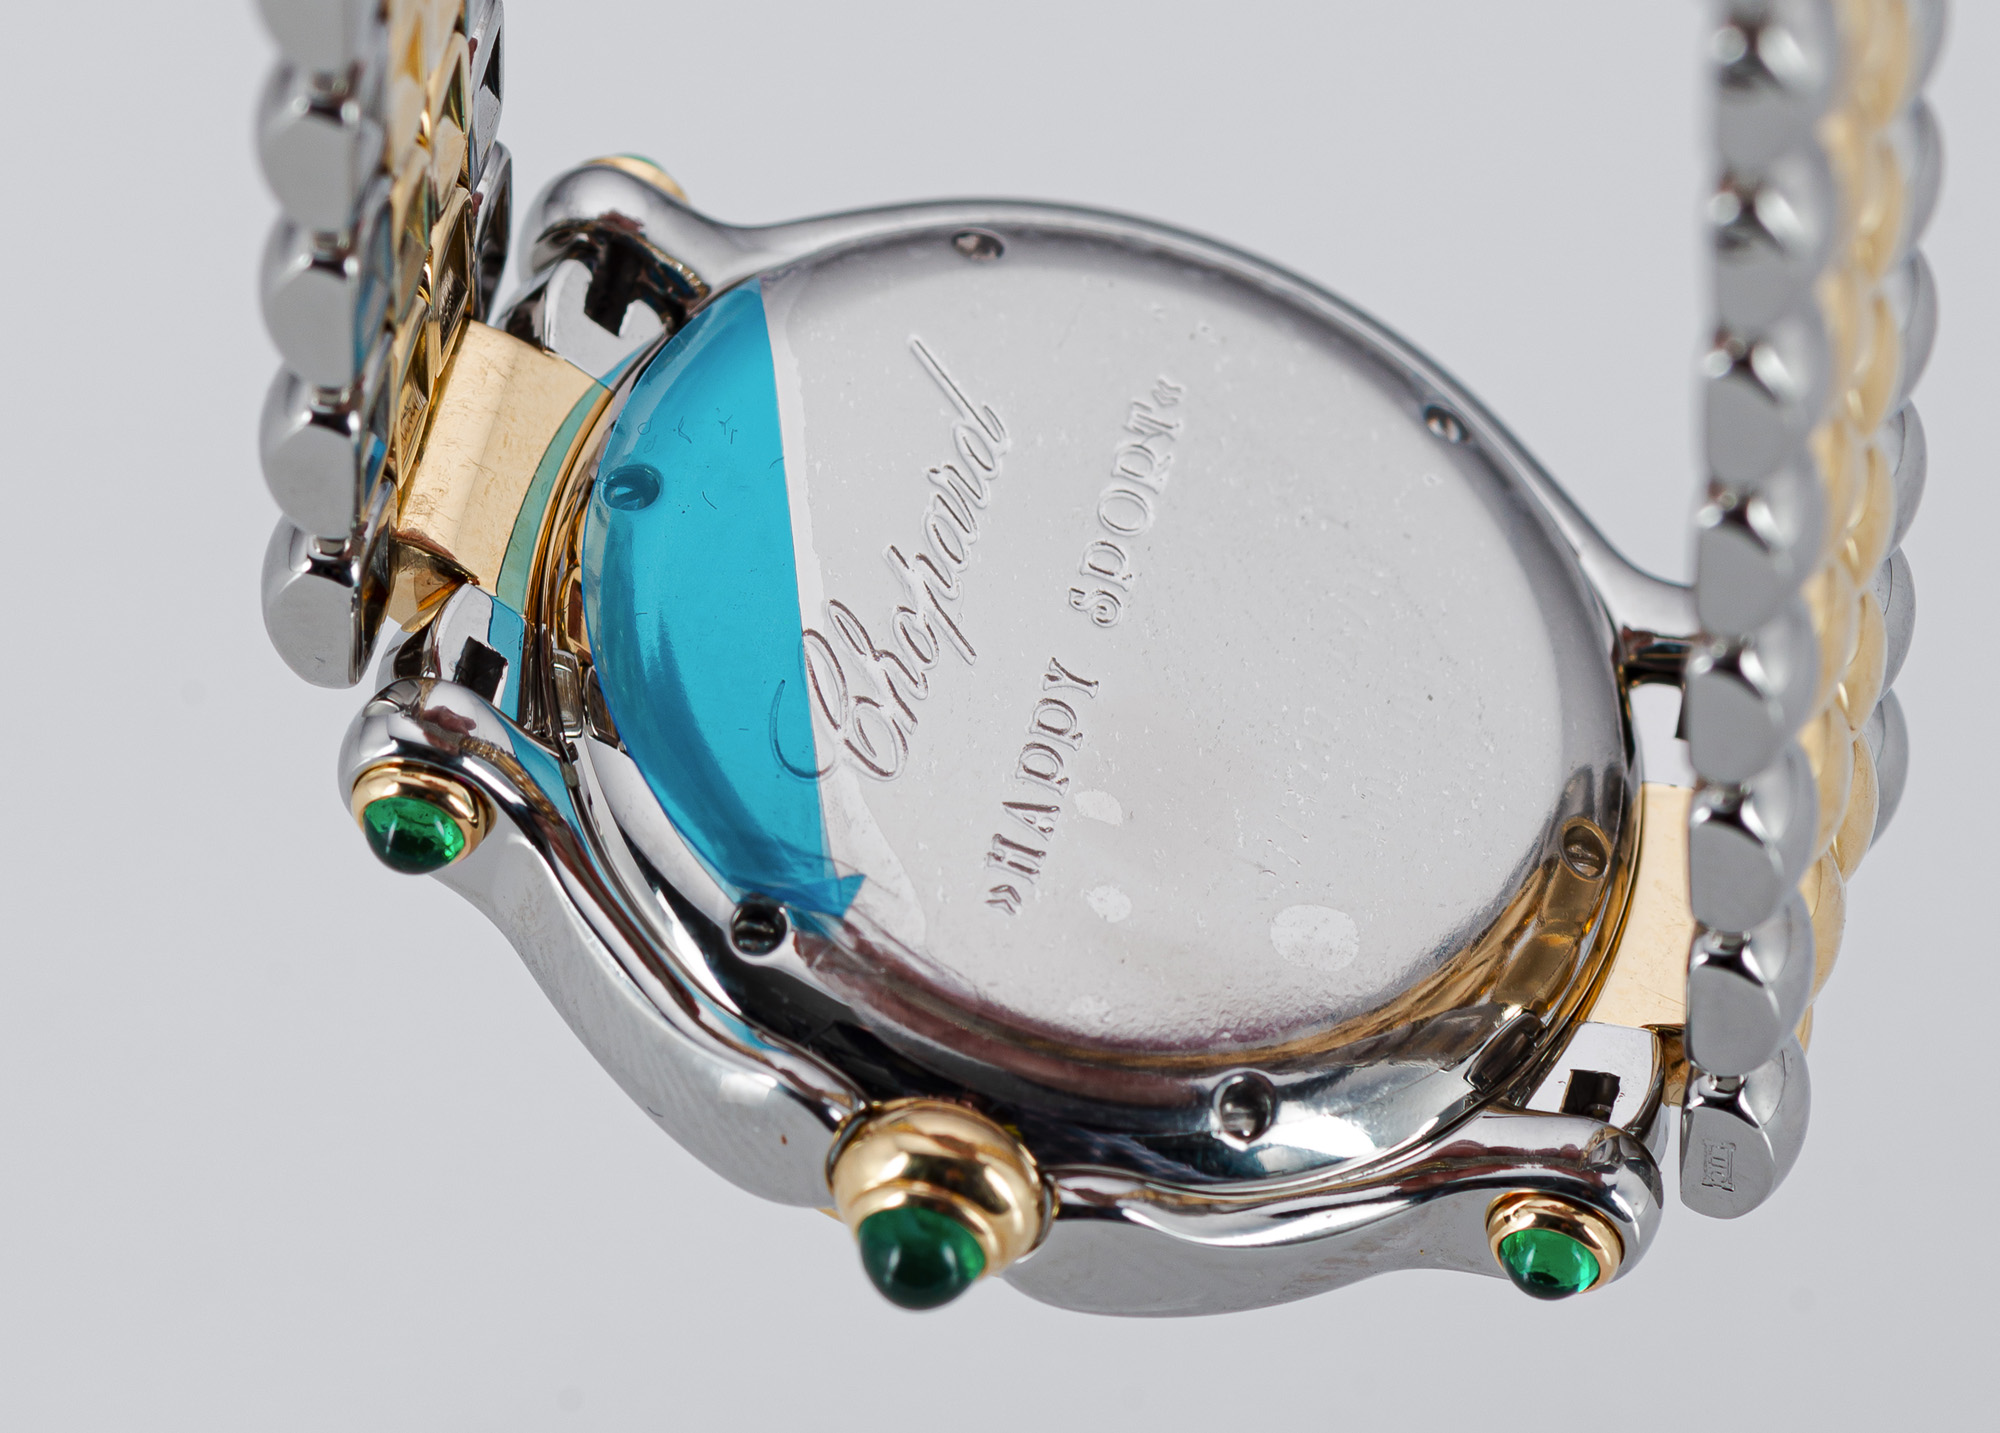 A CHOPARD LADY'S WATCH - Image 5 of 5